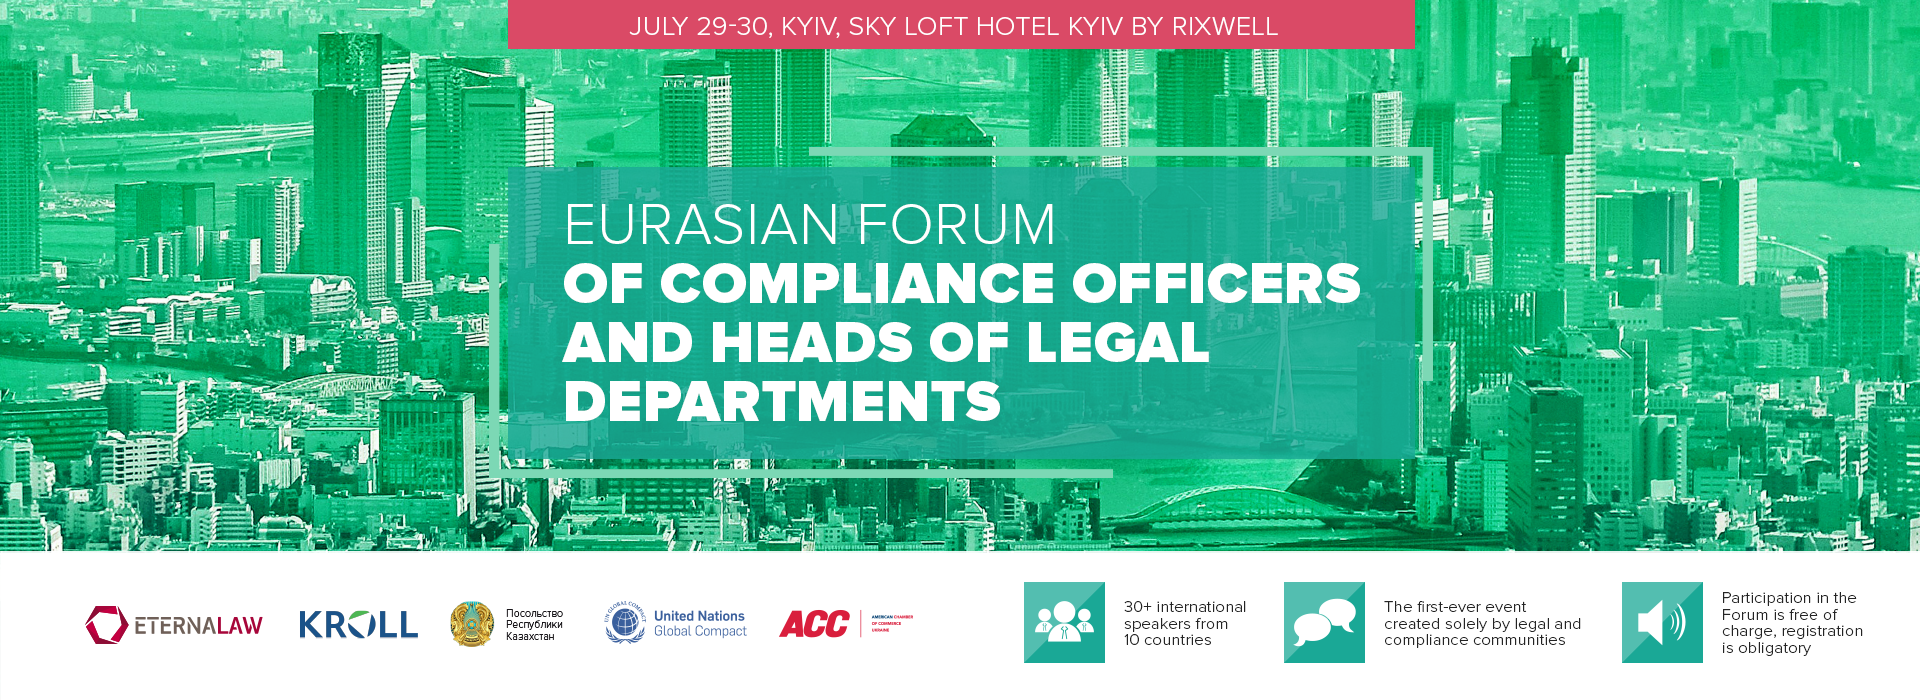 Eurasian Forum of Compliance Officers and Heads of Legal Departments